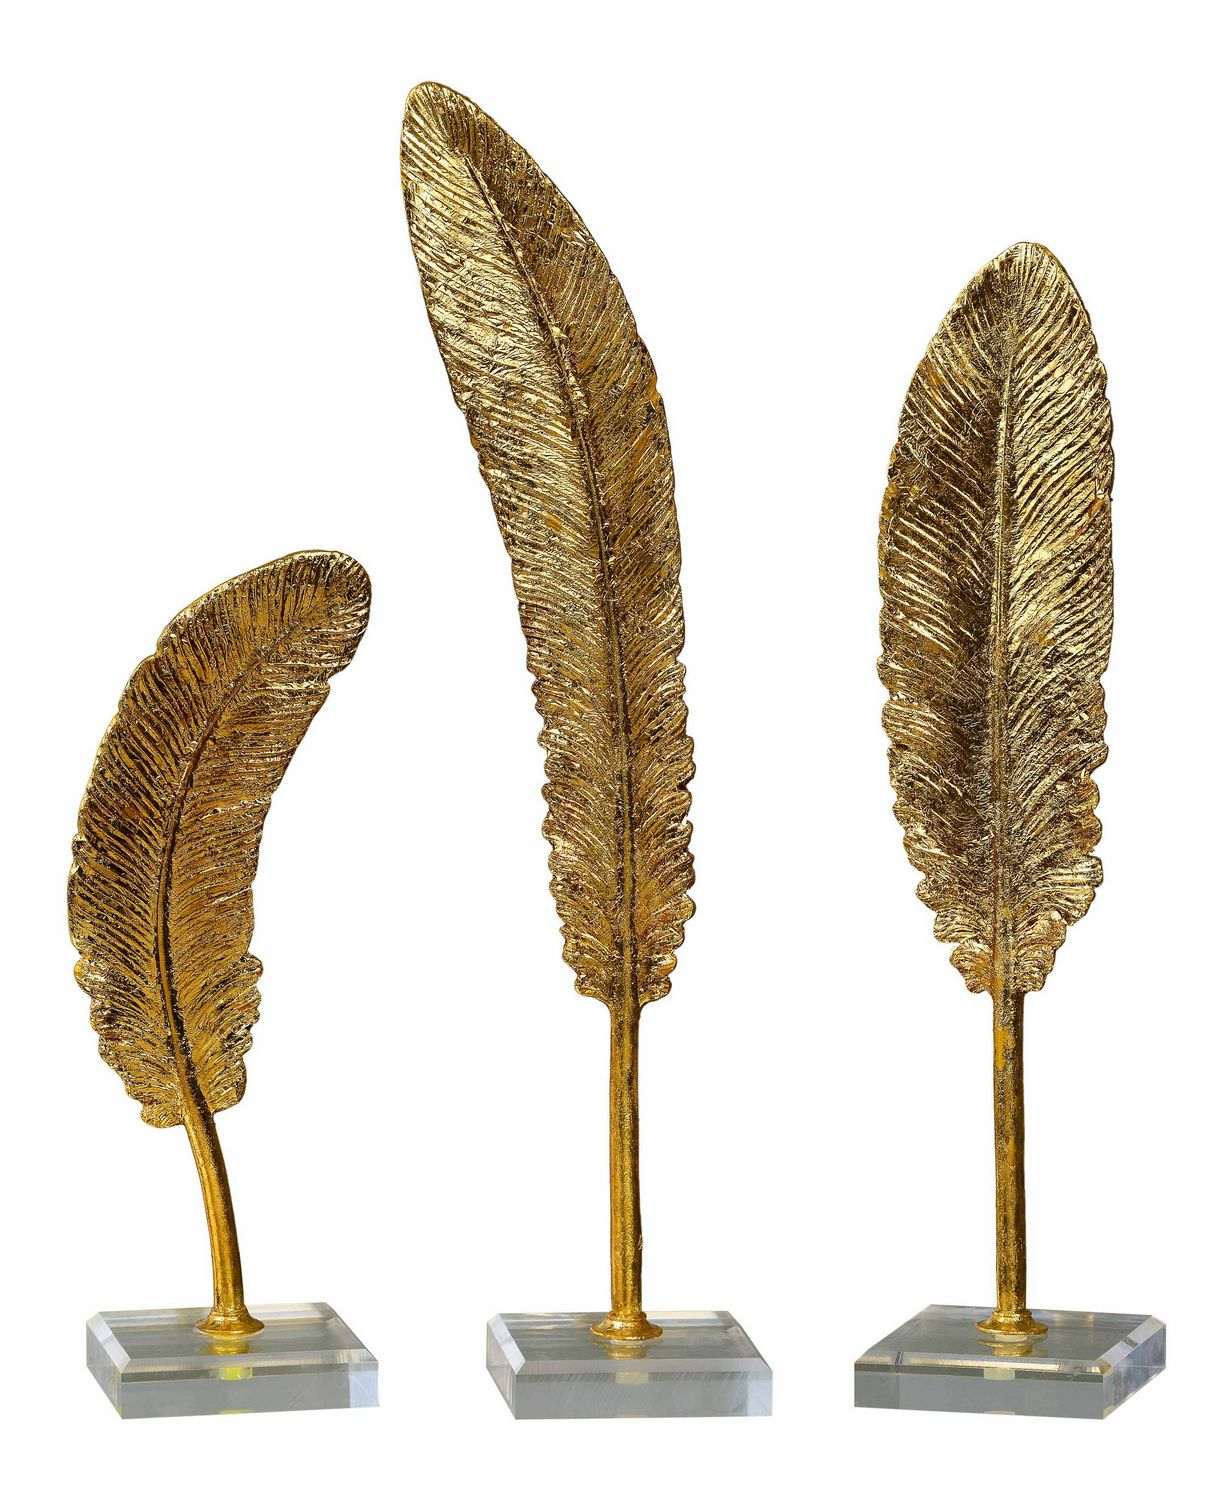 Uttermost Feathers Sculpture - Set of 3 - Gold